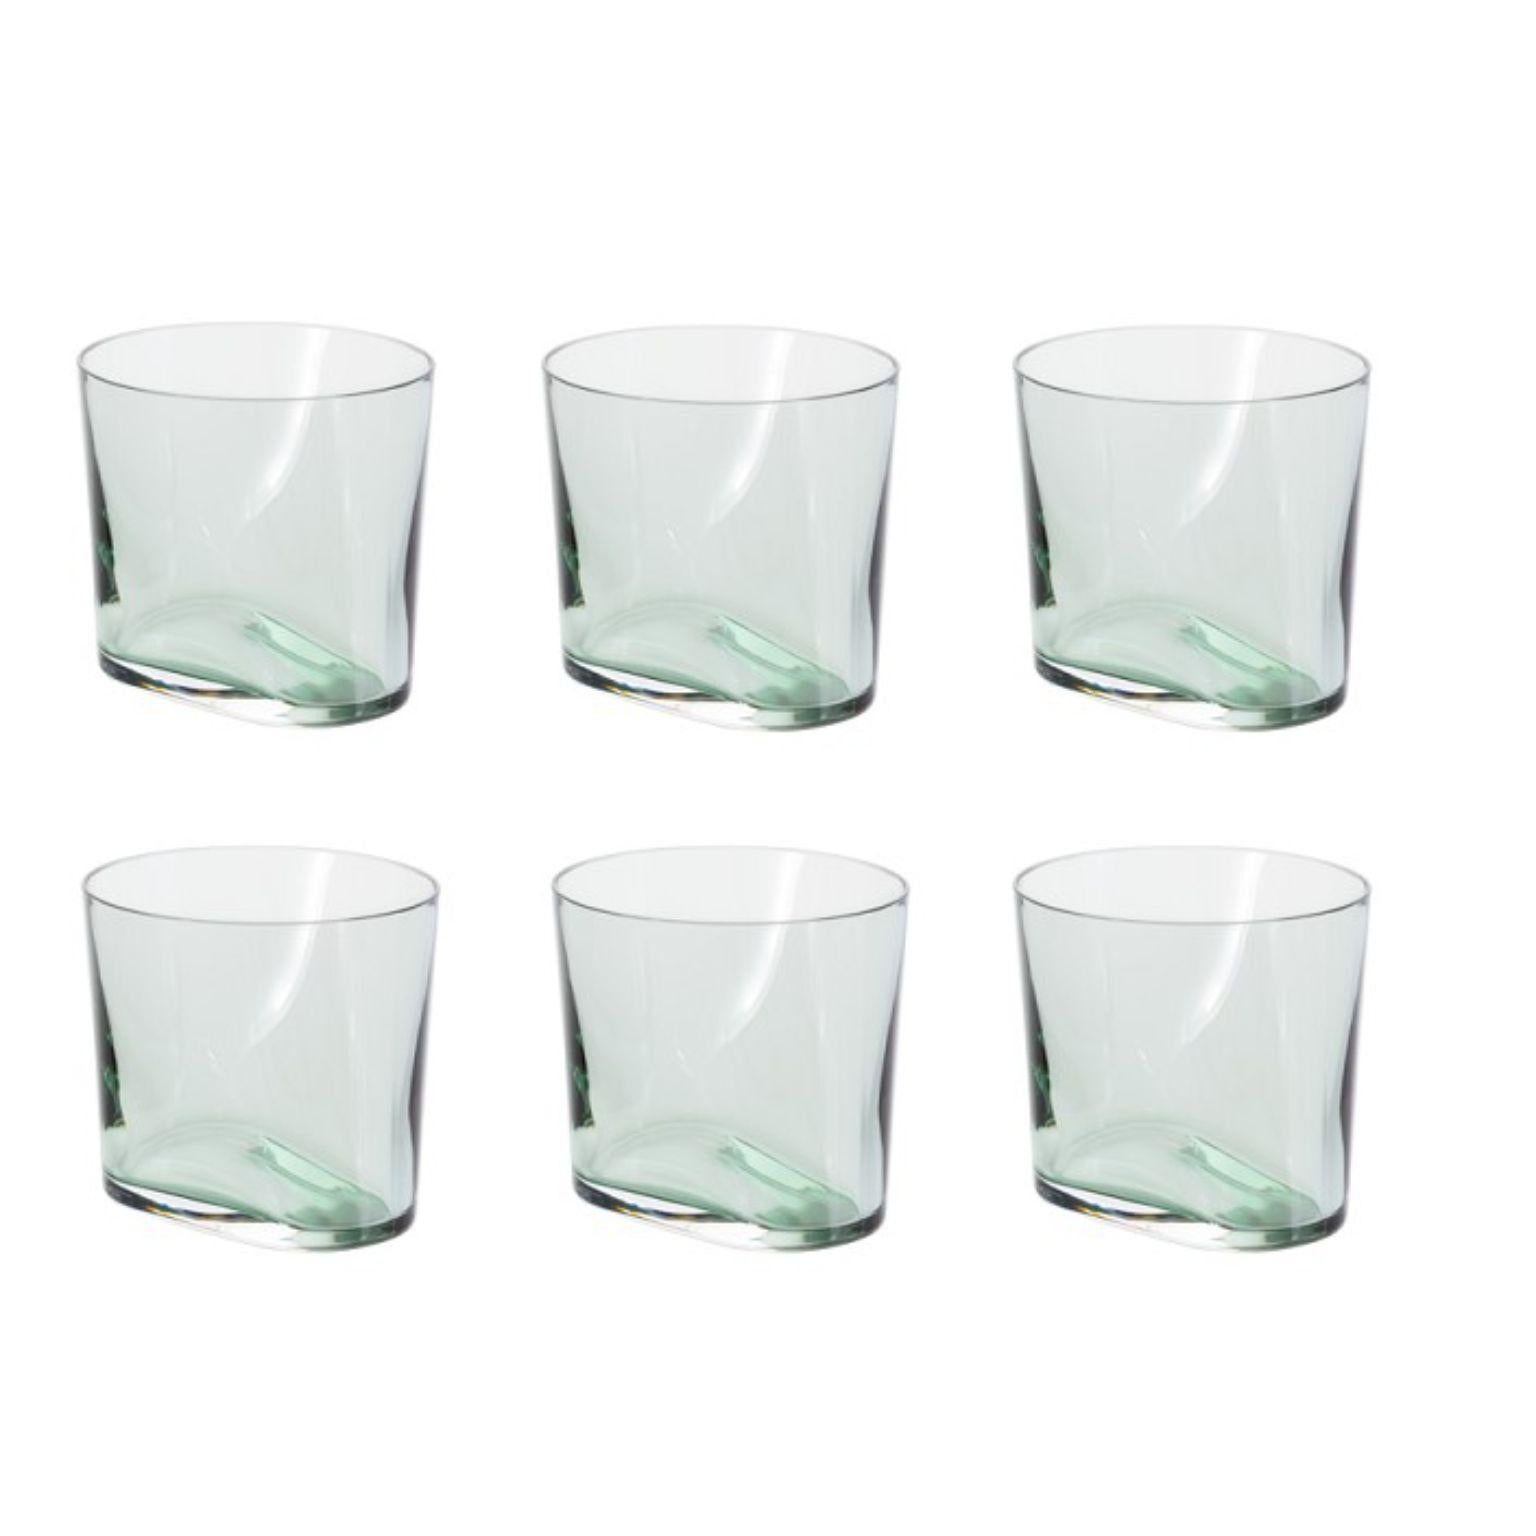 Set of 6 smoke green glasses by Pulpo
Dimensions: D 8.5 x H 8.5 cm
Materials: handmade glass

Pick them, pour them, roll them, and hold them; a kaleidoscope of colour, form and texture awaits. The potpourri collections by German designer Meike